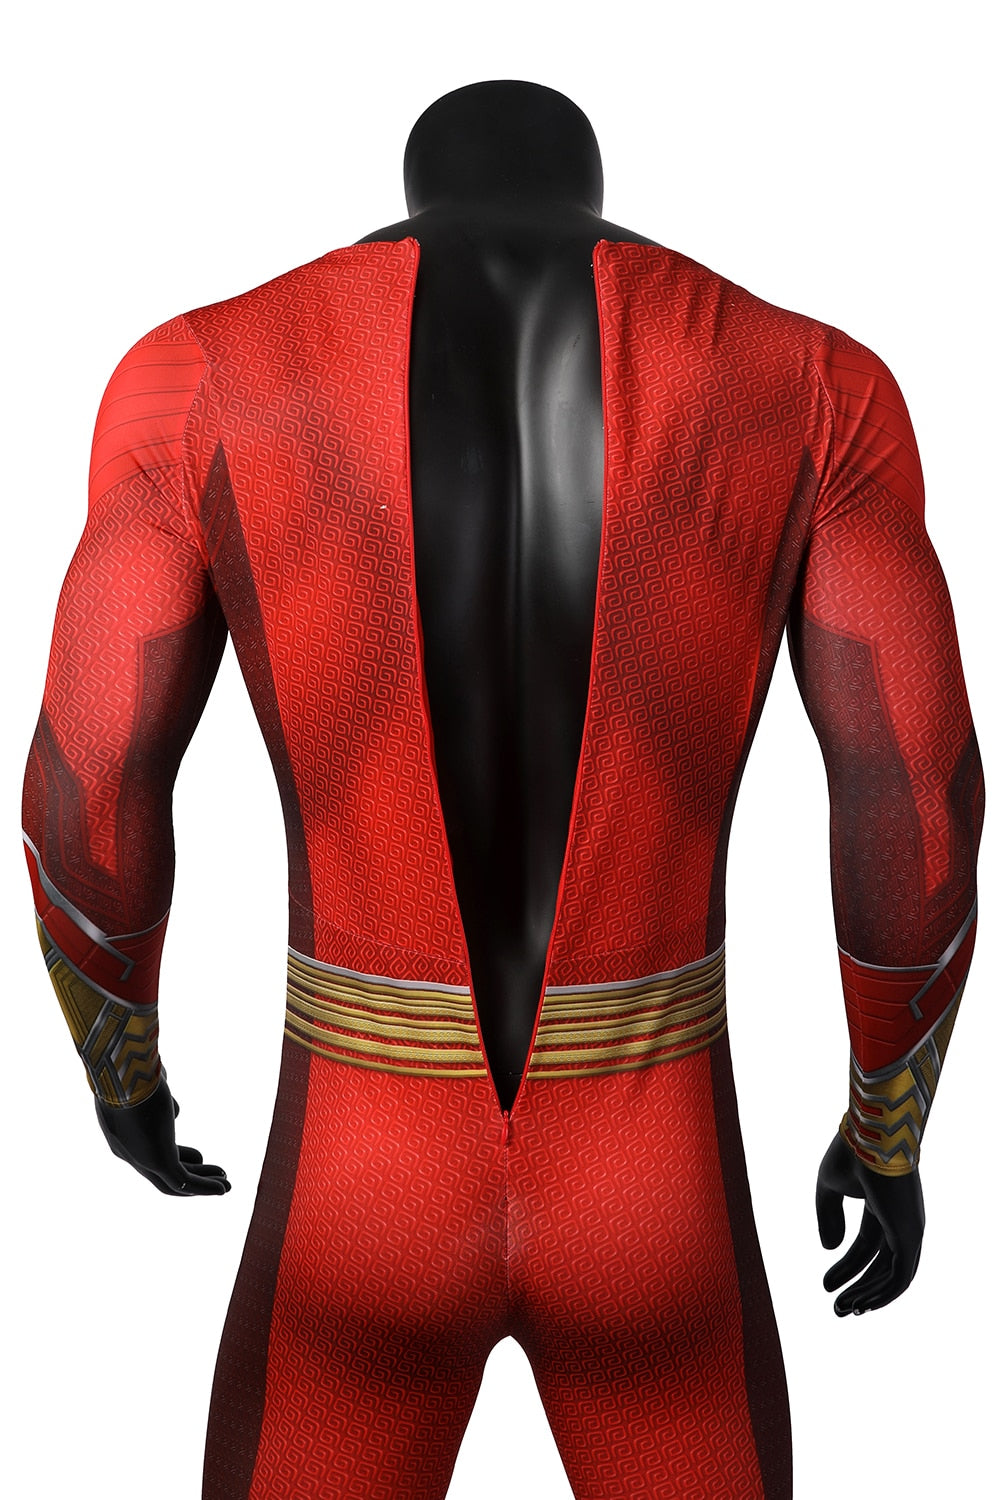 Disguise Billy Zentai Suit Red Man Shazam Cosplay Costume Outfit with Suit and Cloak 3D Printed Halloween Spandex Bodysuit